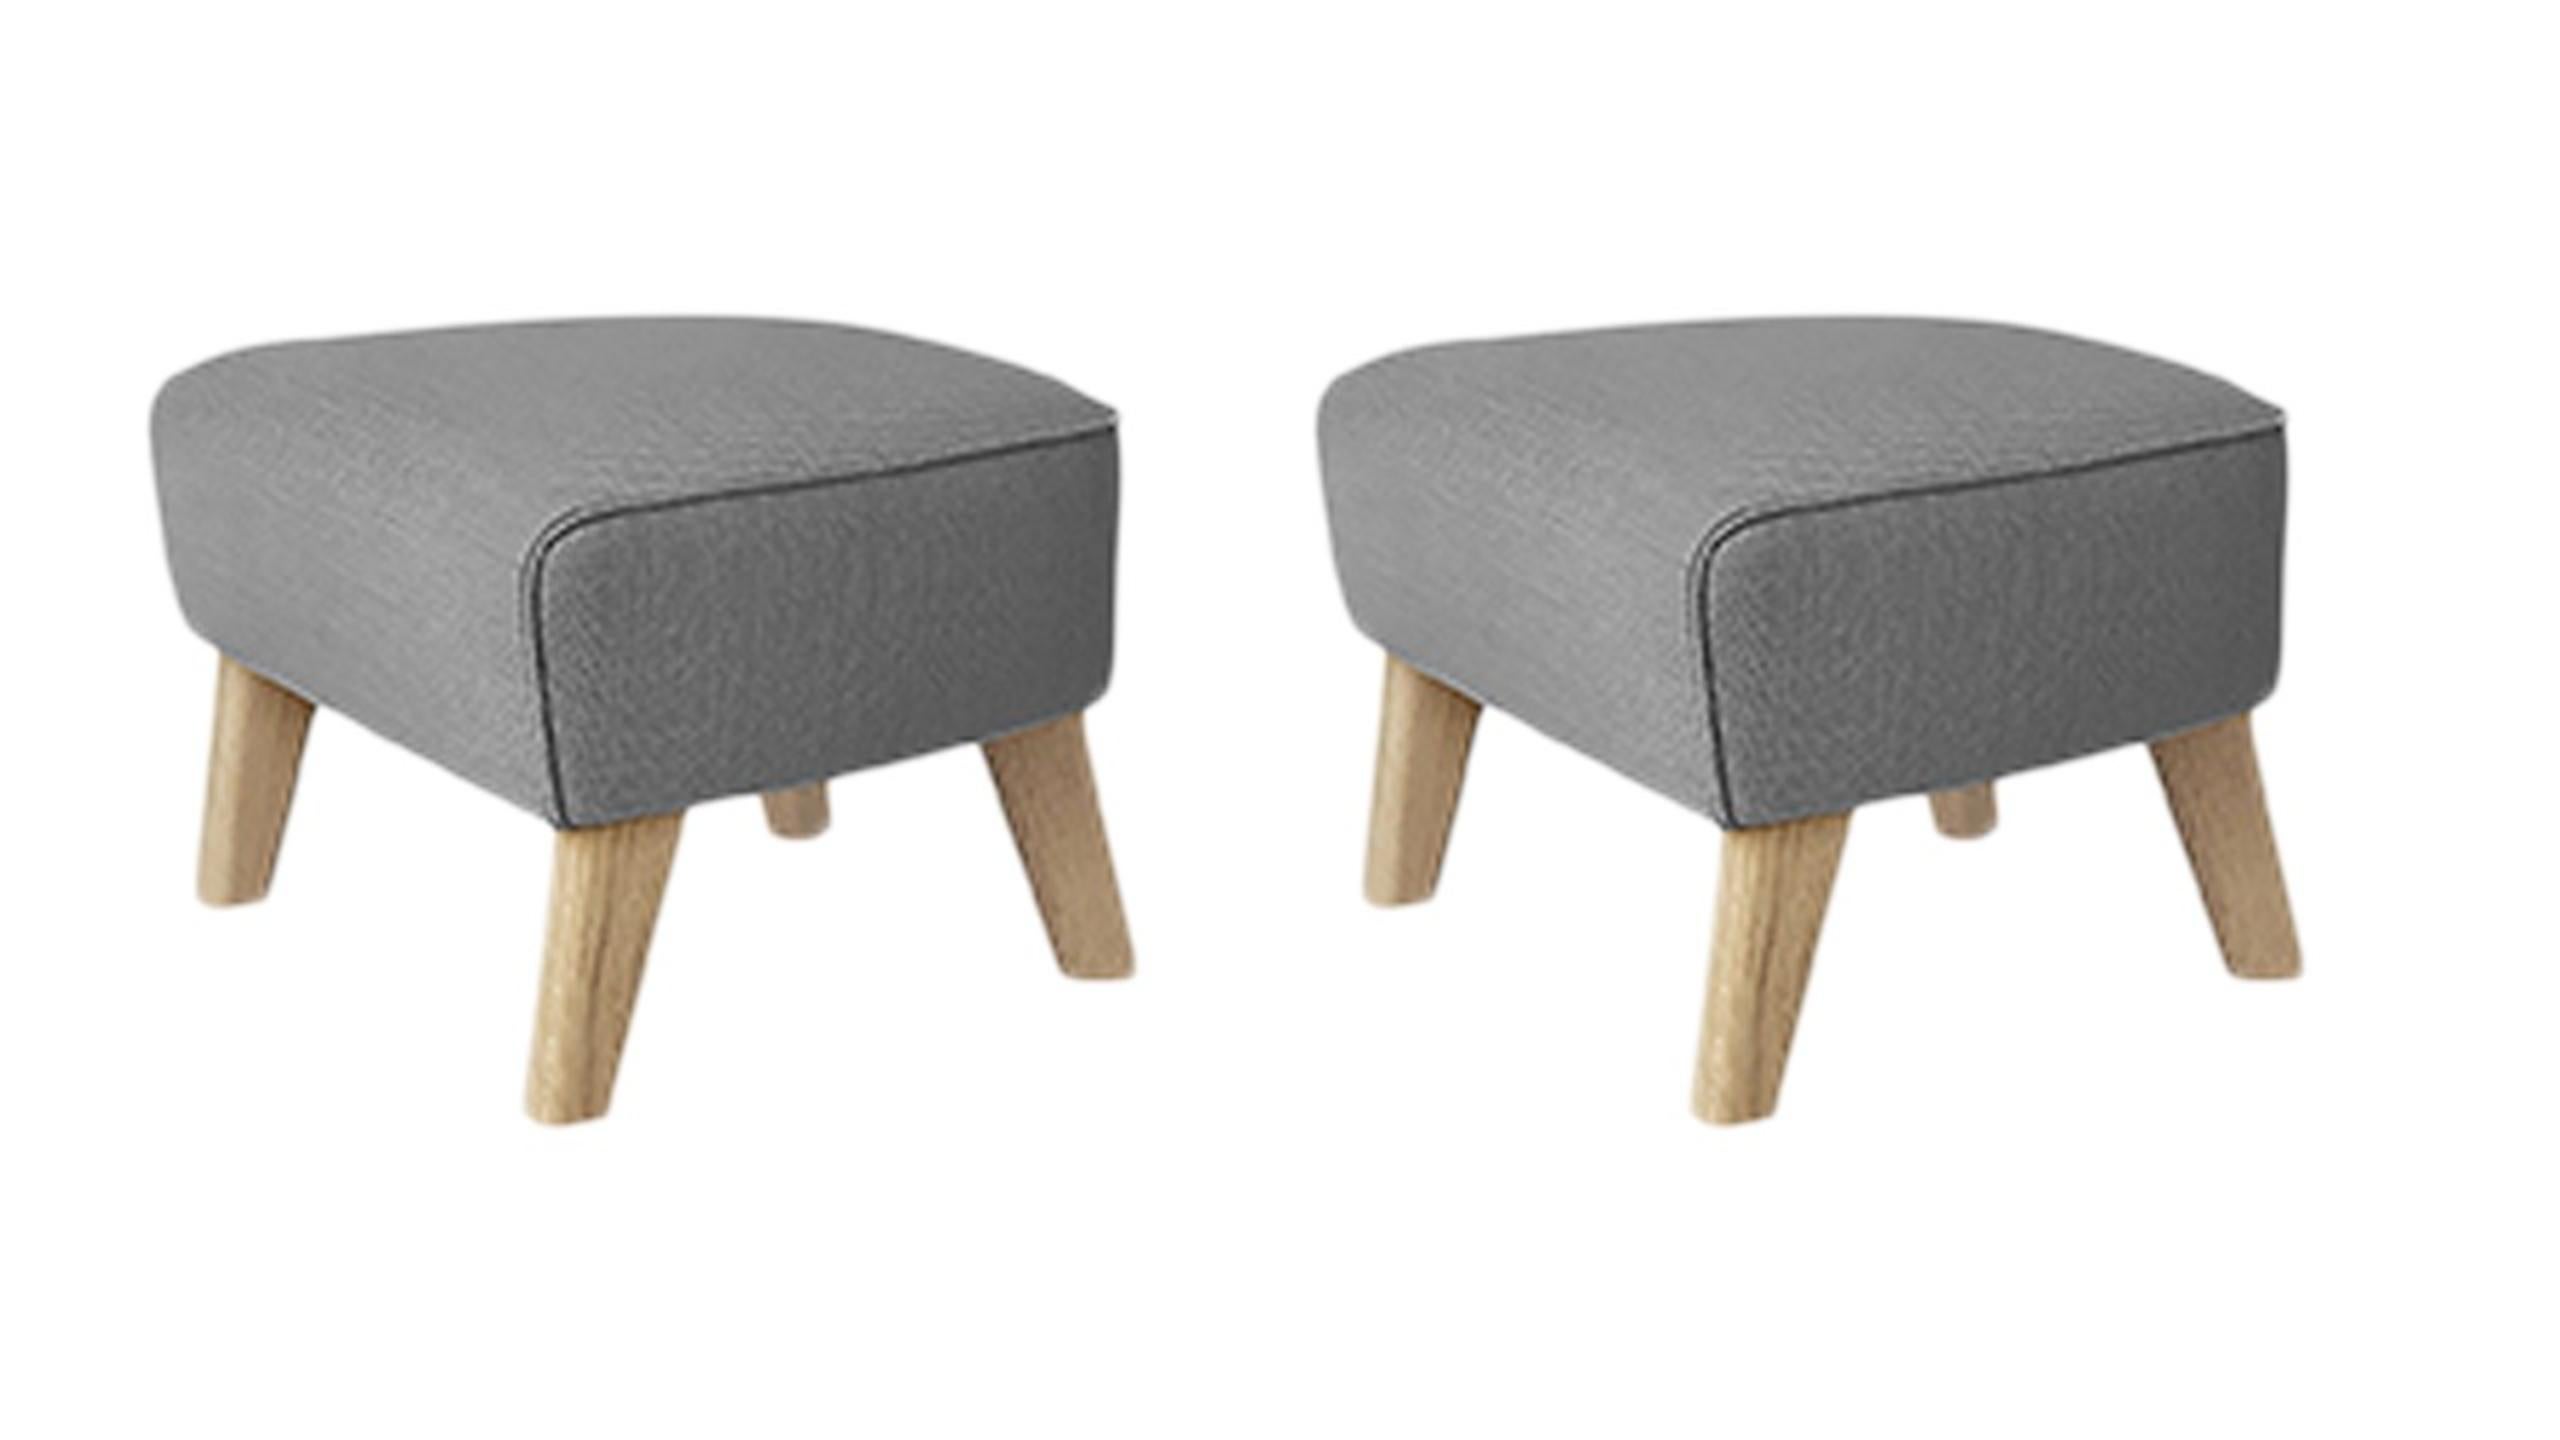 Set of 2 grey, natural oak Raf Simons Vidar 3 my own chair footstool by Lassen
Dimensions: W 56 x D 58 x H 40 cm 
Materials: Textile
Also available: Other colors available

The my own chair footstool has been designed in the same spirit as